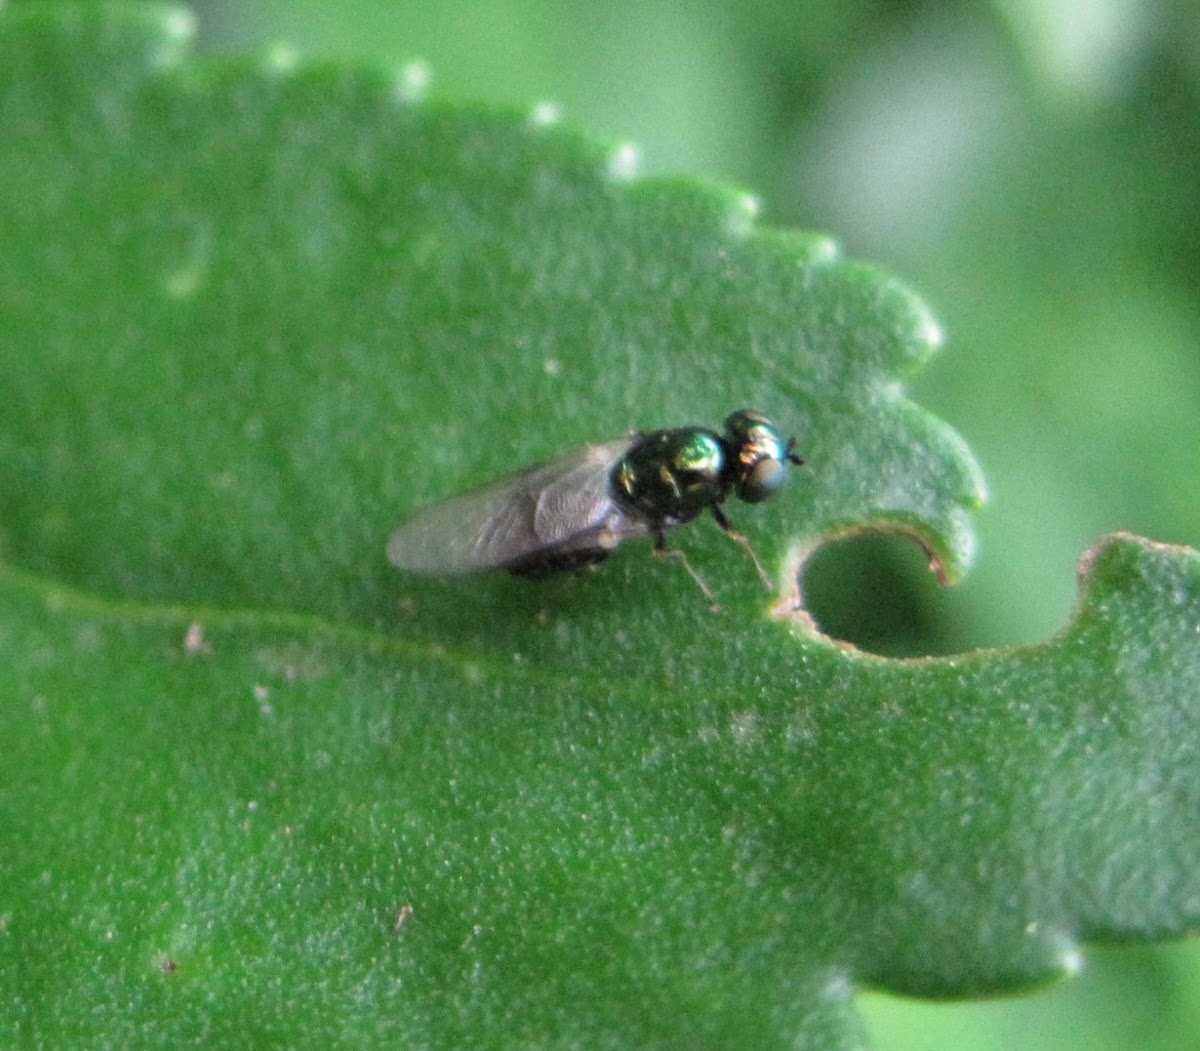 Soldier Fly, female